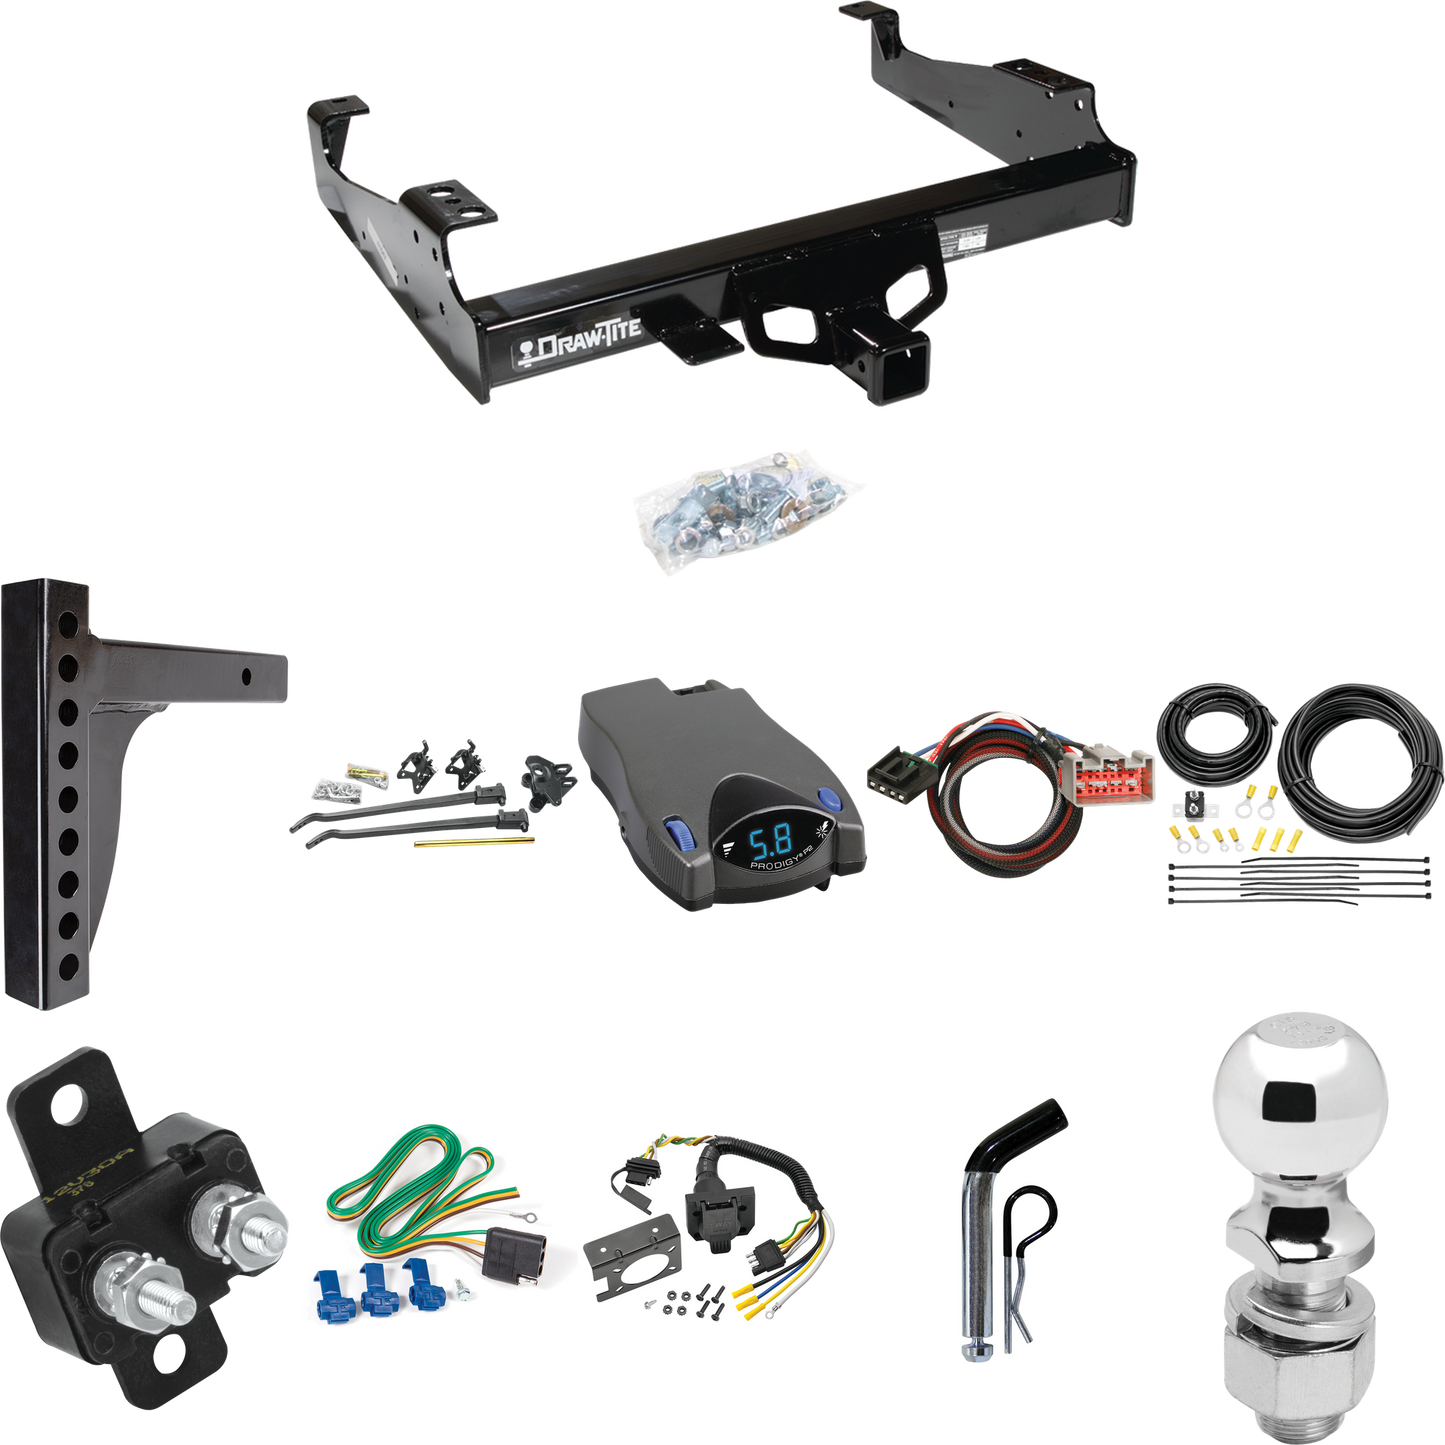 Fits 1999-2004 Ford F-450 Super Duty Trailer Hitch Tow PKG w/ 12K Trunnion Bar Weight Distribution Hitch + Pin/Clip + 2-5/16" Ball + Tekonsha Prodigy P2 Brake Control + Plug & Play BC Adapter + 7-Way RV Wiring (For Cab & Chassis, w/34" Wide Frames Mo